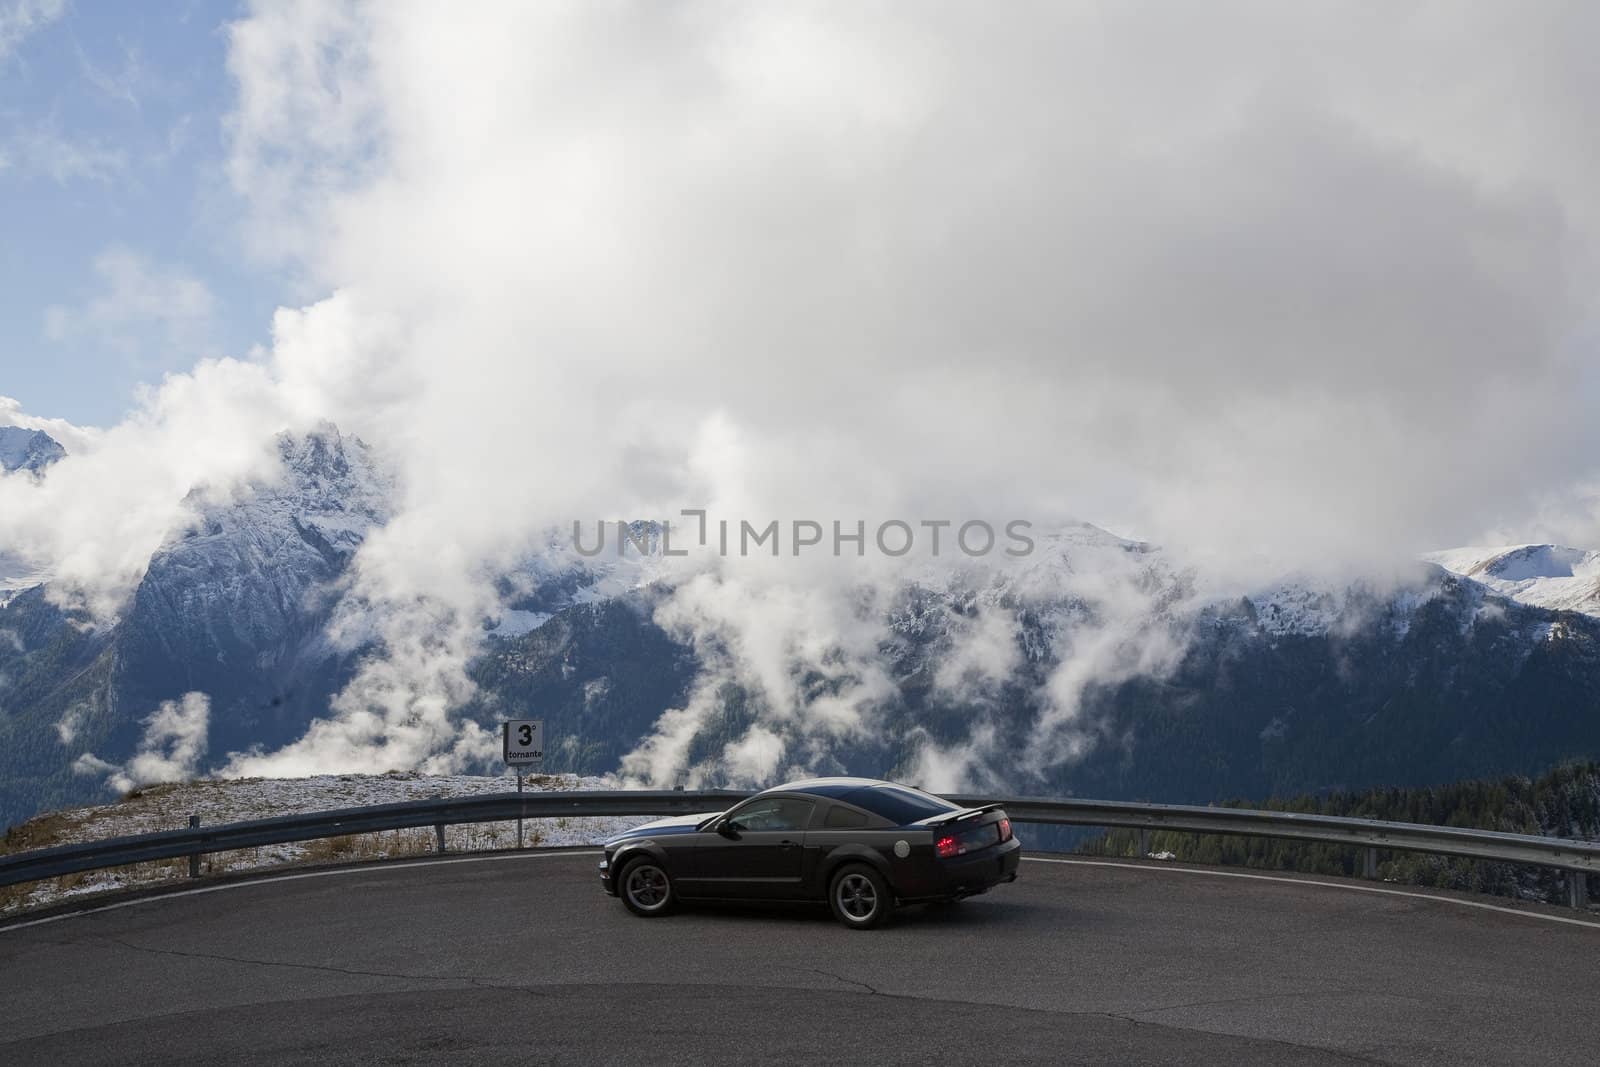 Low hanging clouds behind automobile in a hairpin bend in the Dolomites - Italy.